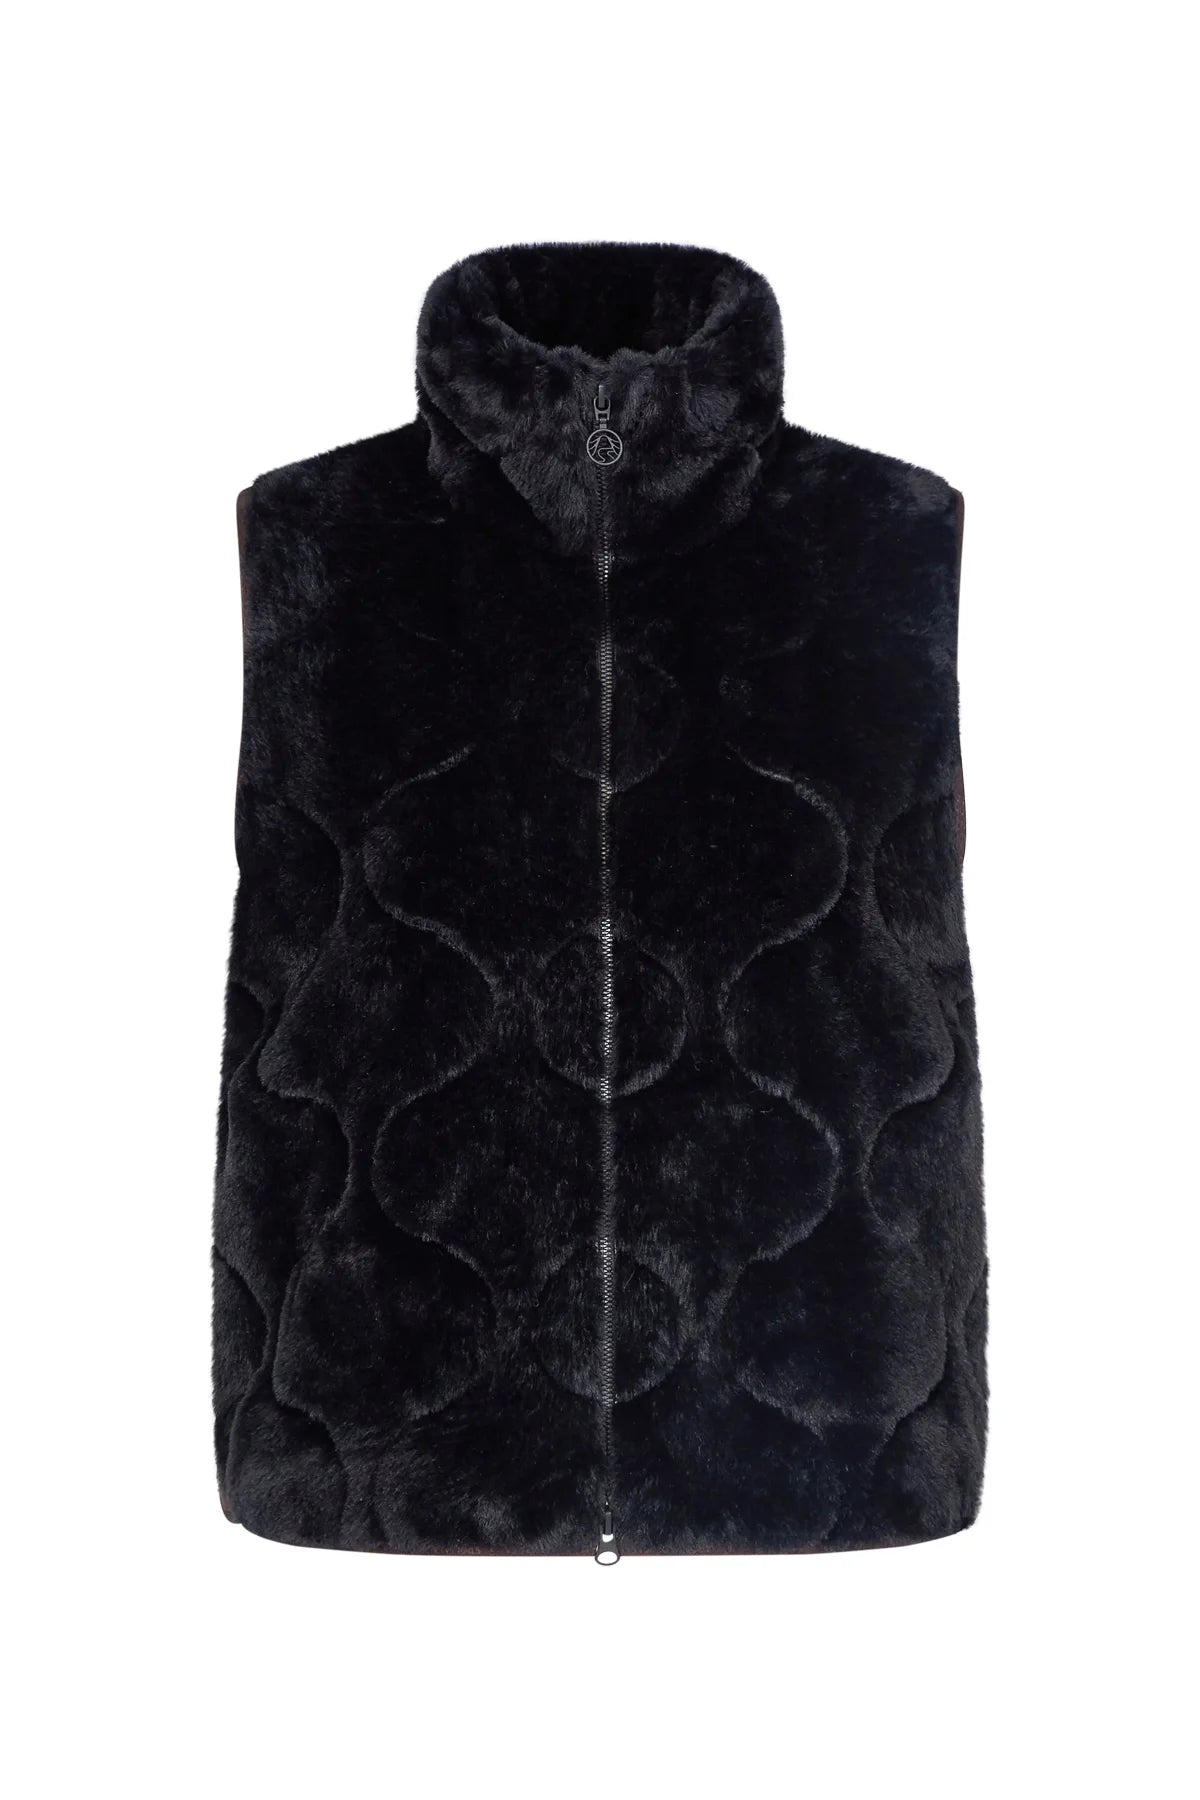 Plush Vest with Stand-Up Collar